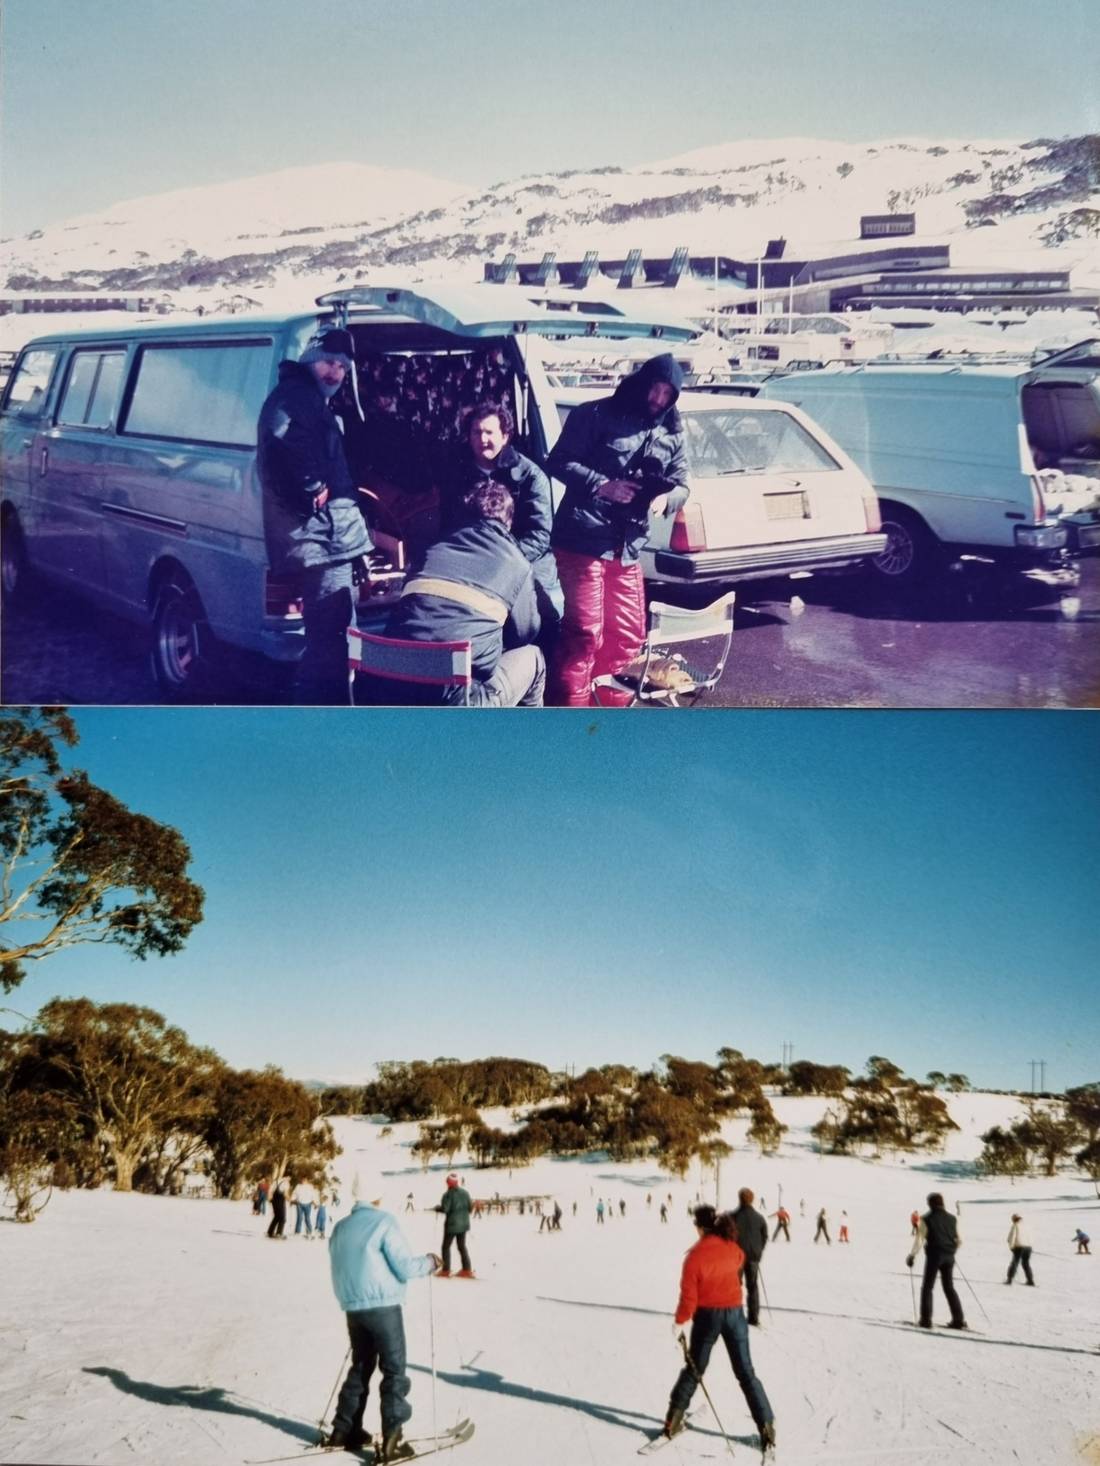 So we made the most of the snow and our location. We snuck in a couple of weekend ski trips to the Snowy Mountains (about 2 and half hours drive from Canberra). The photo at the top of these two is Perisher car park. The one directly above is of Mount Selwyn where there were lots of beginner ski slopes.